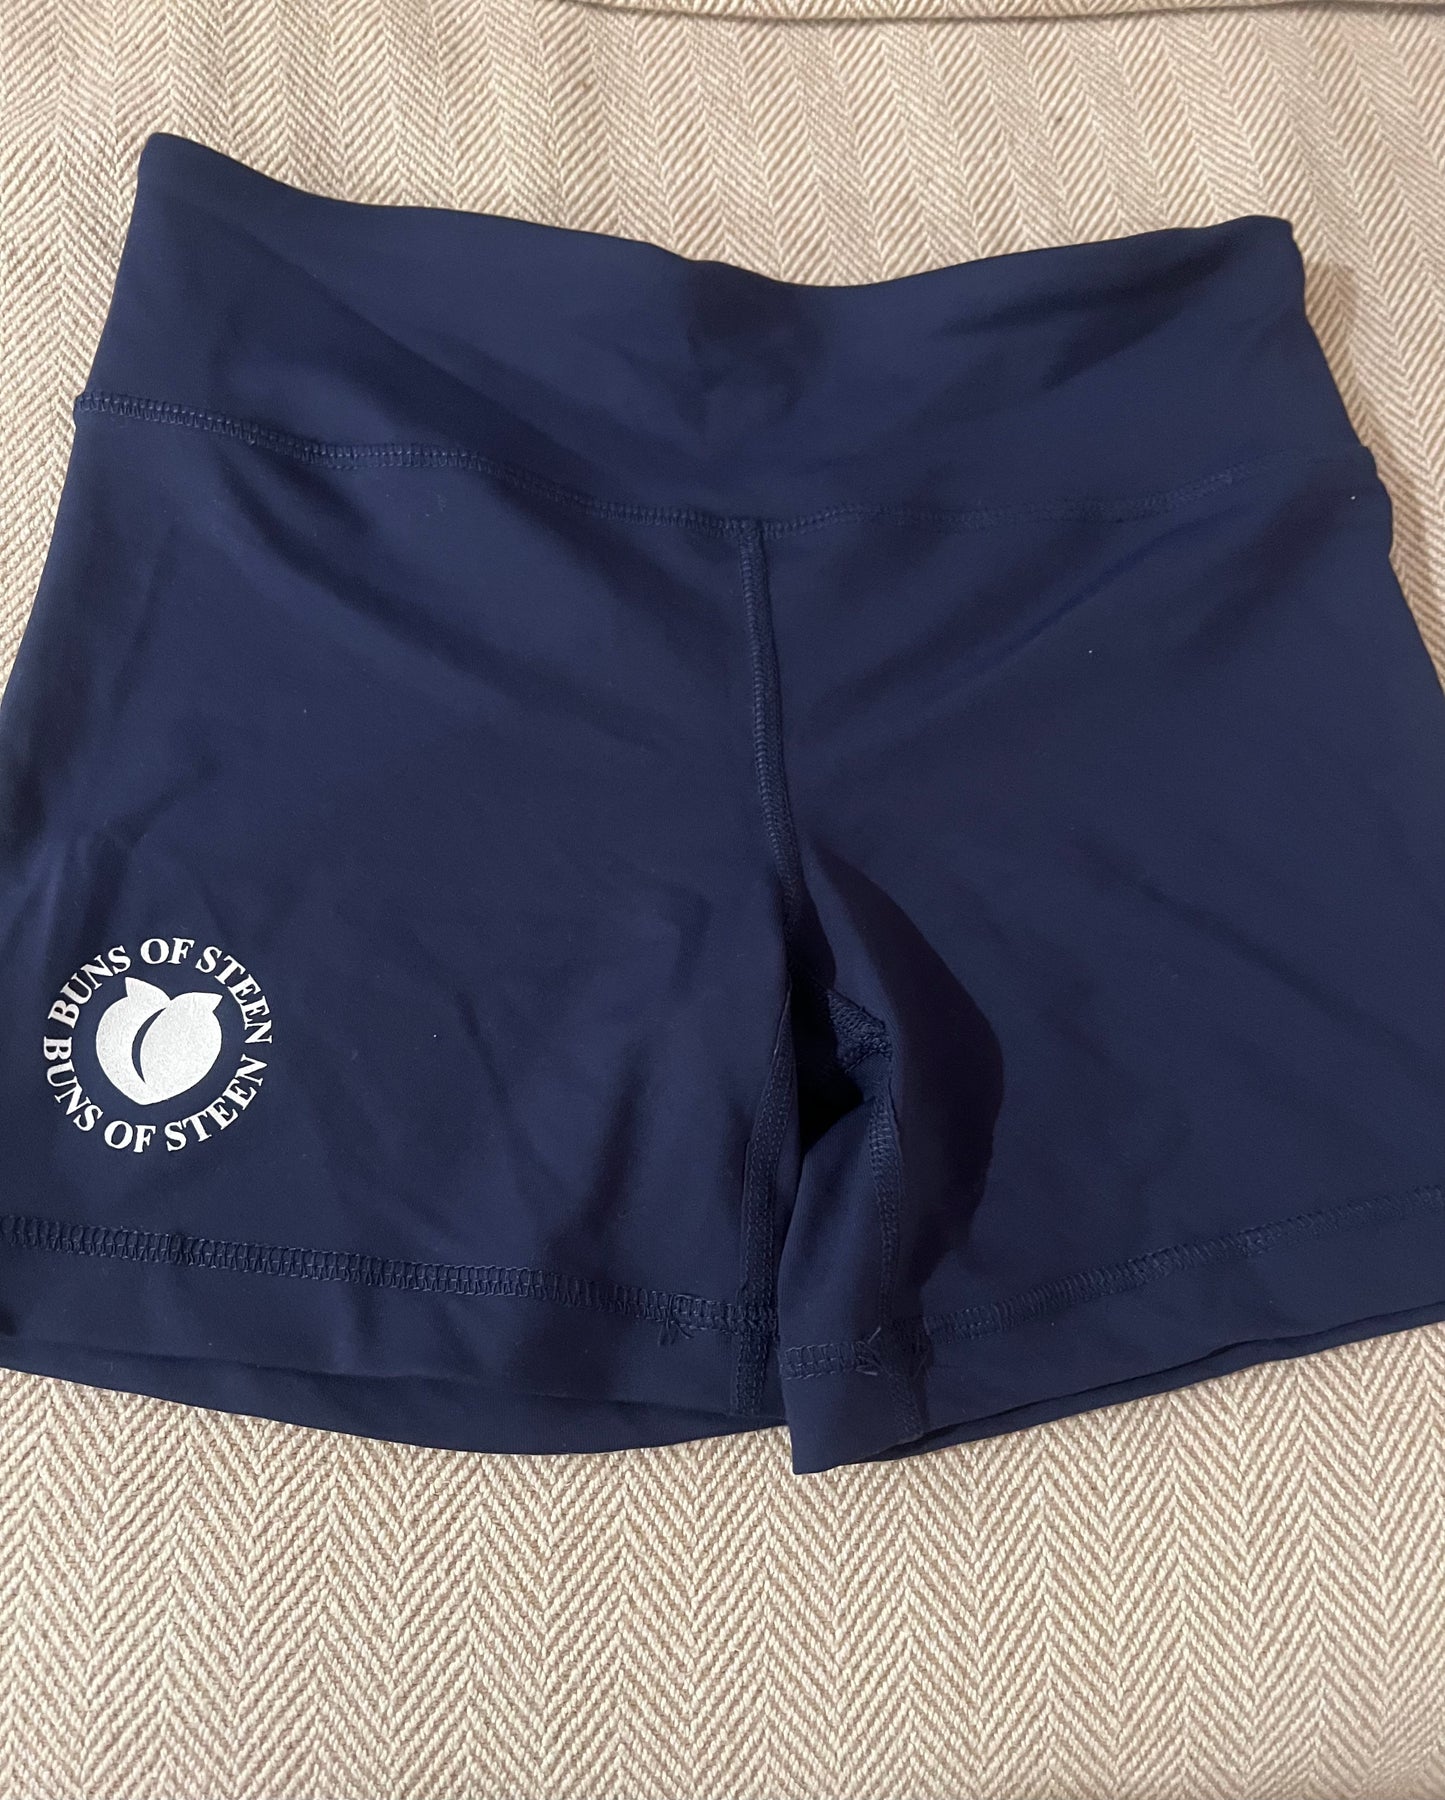 Buns Of Steen® Mid Thigh Shorts